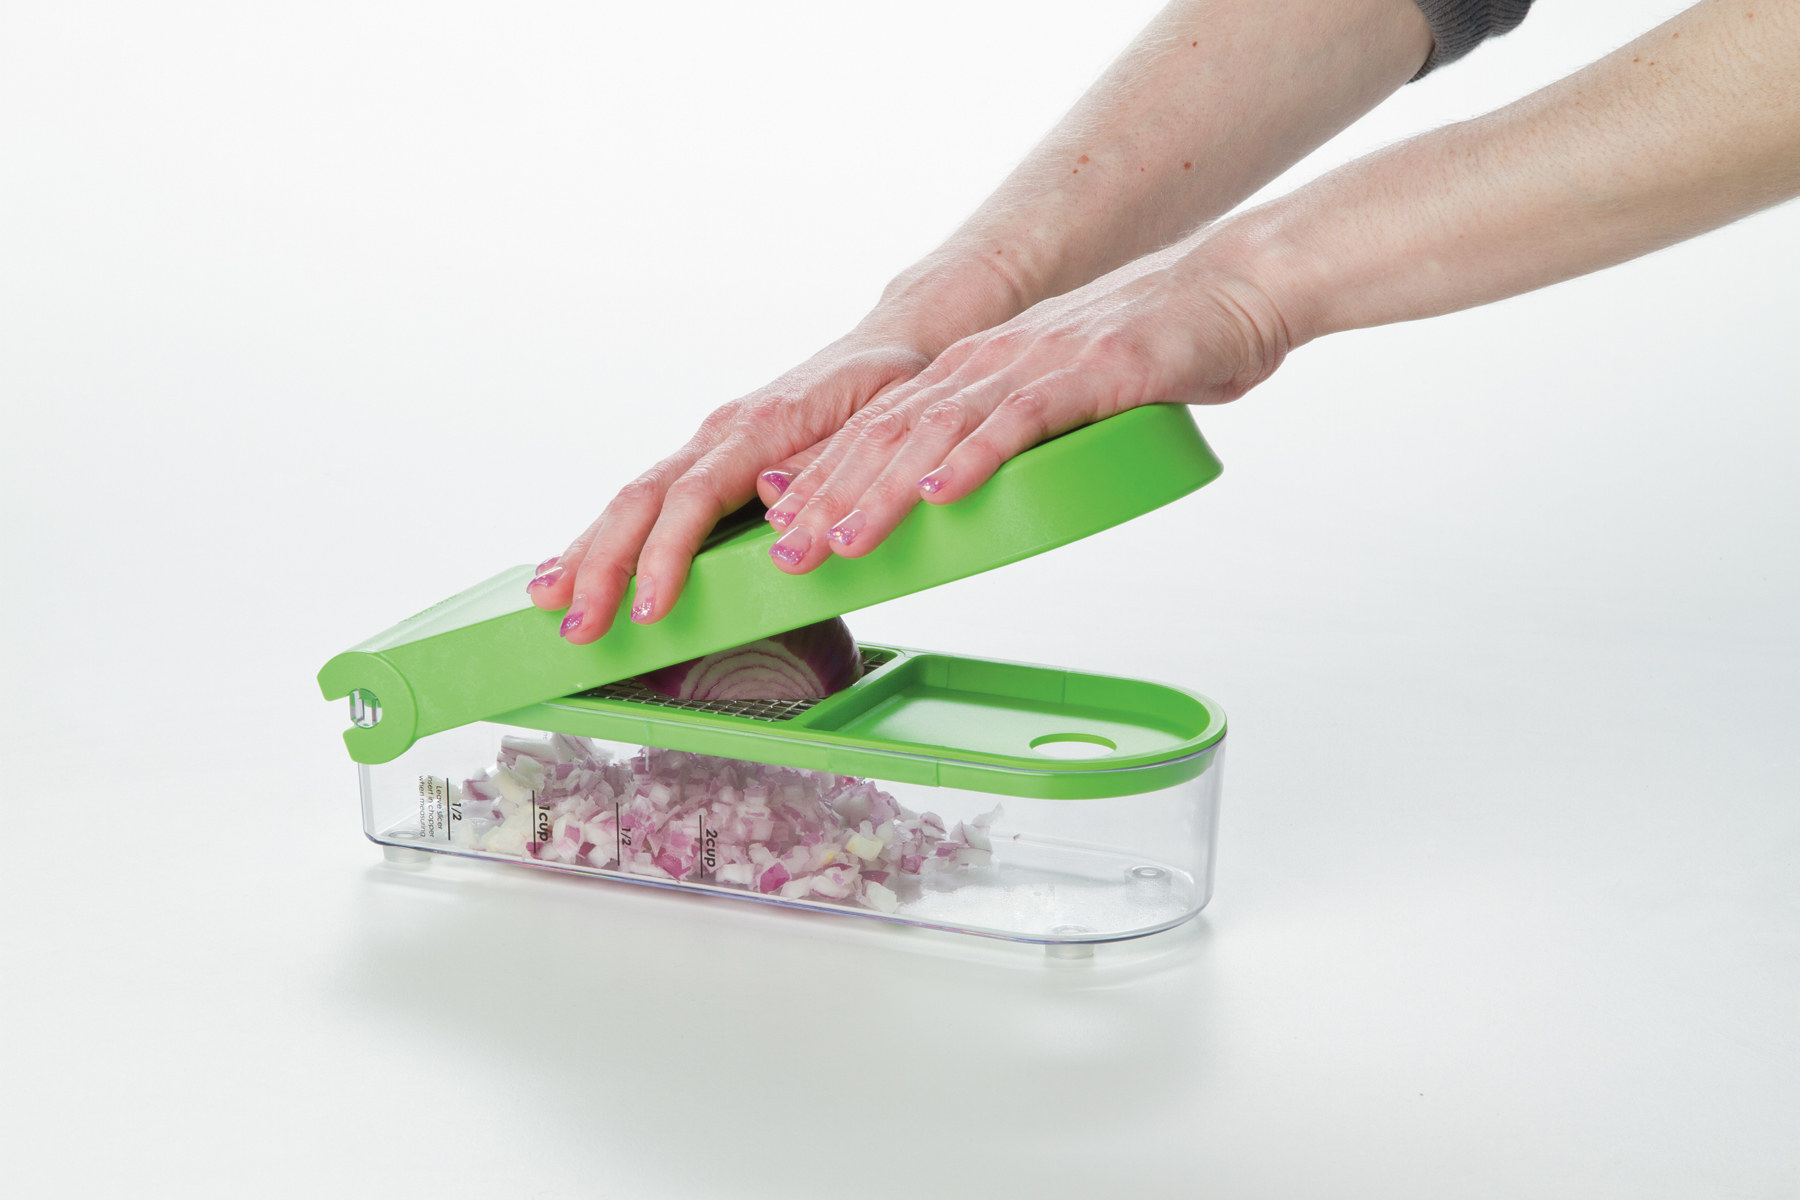 hands using an onion dicer with a green lid to chop an onion